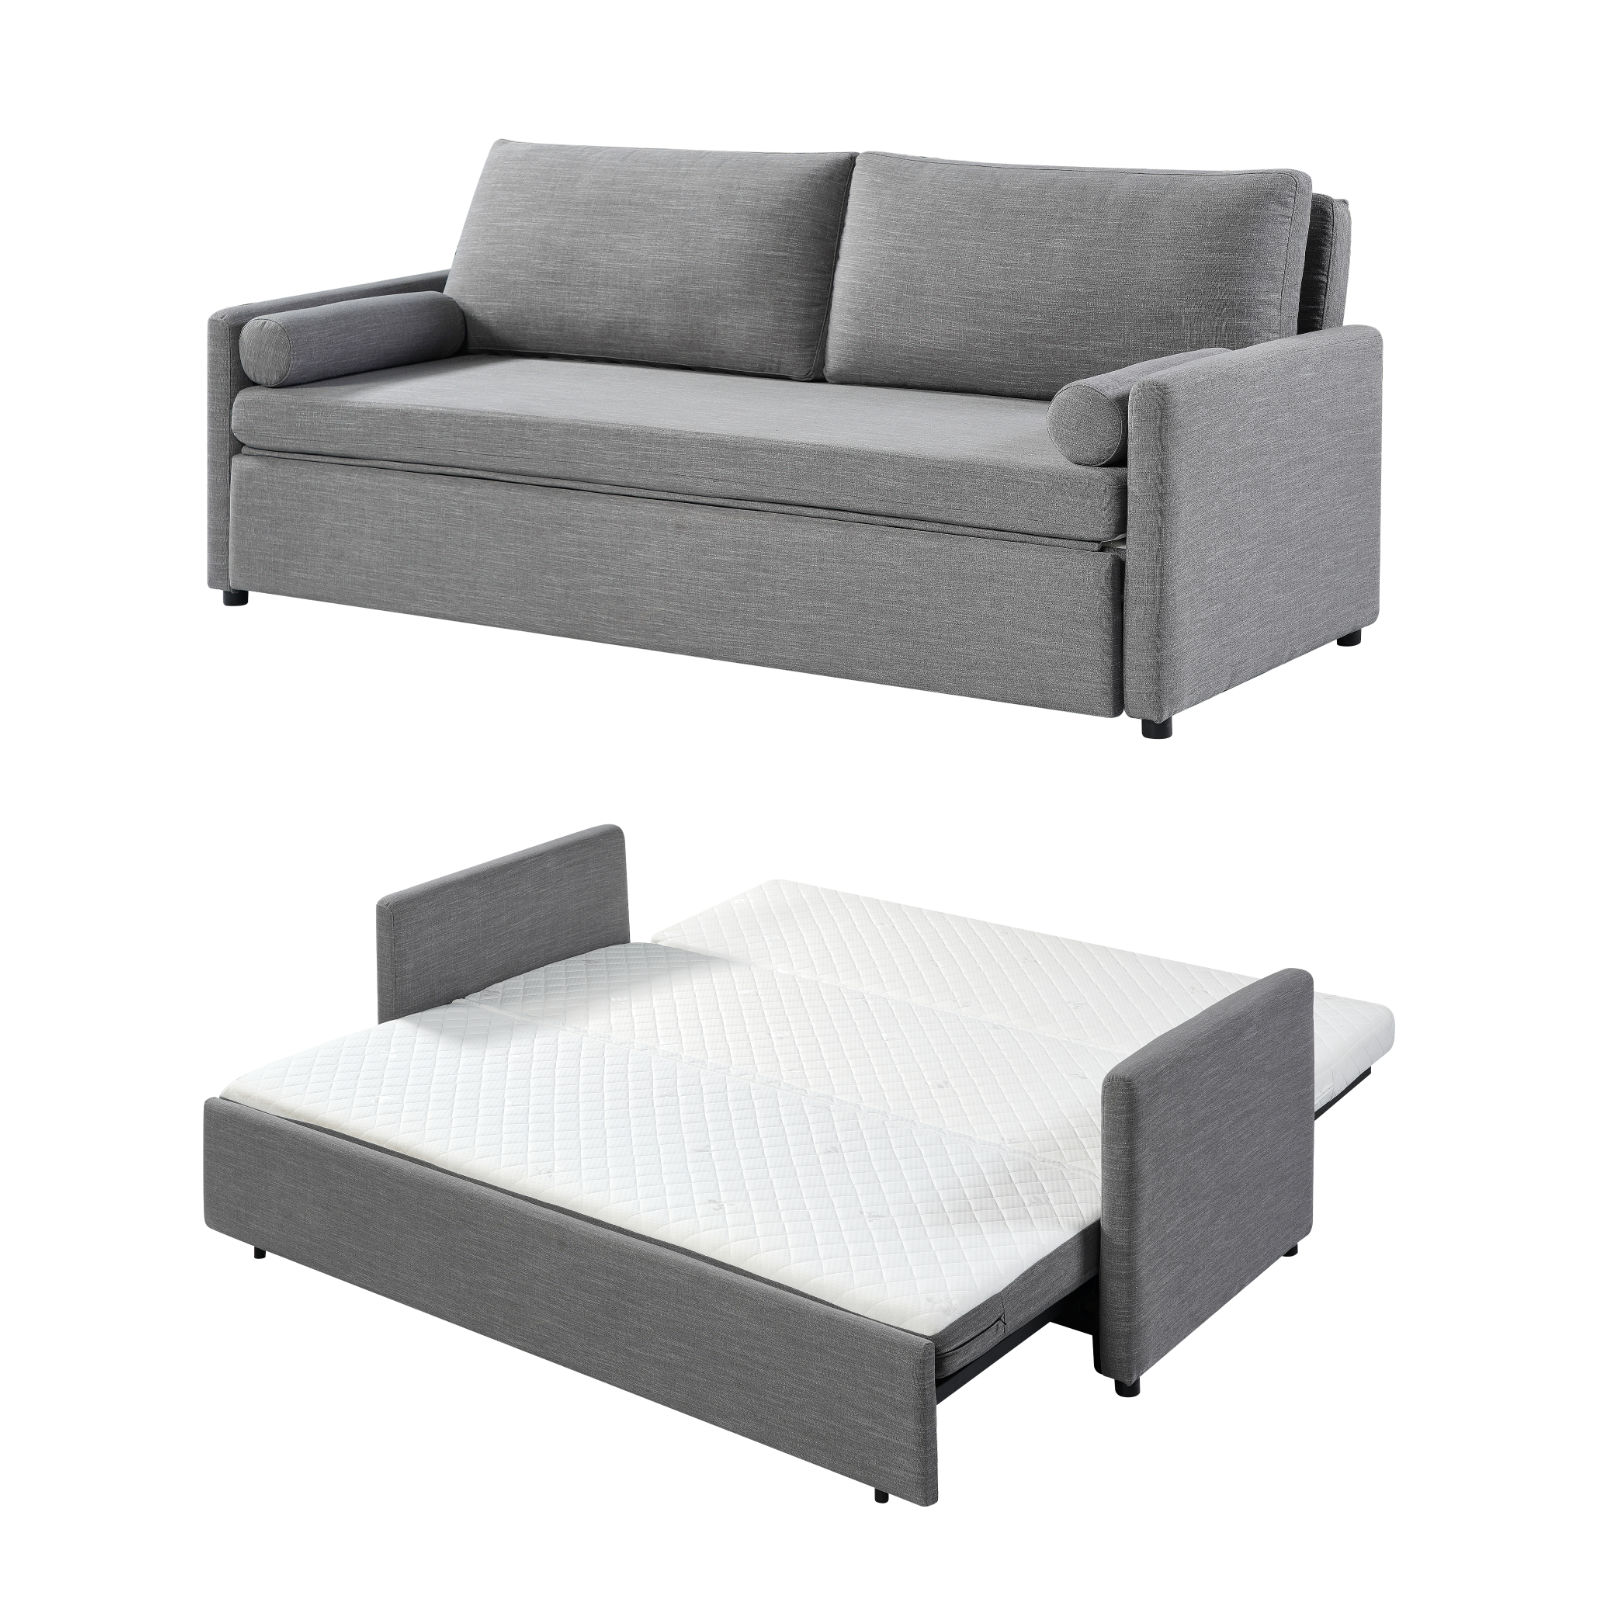 Harmony – King Sofa bed with Memory Foam - Expand Furniture